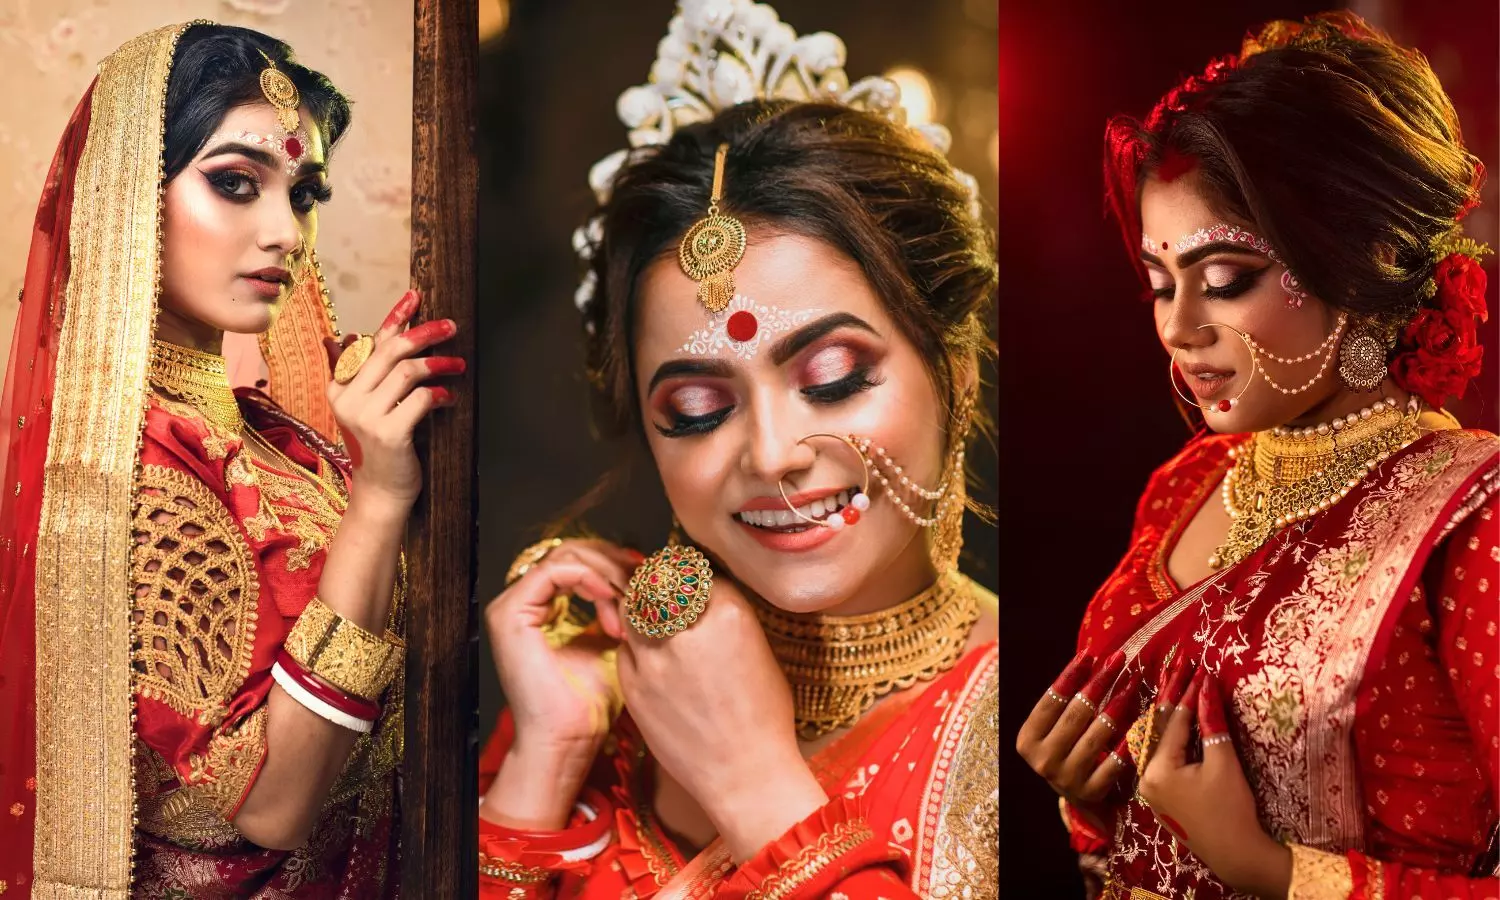 Indian women with wedding ornaments